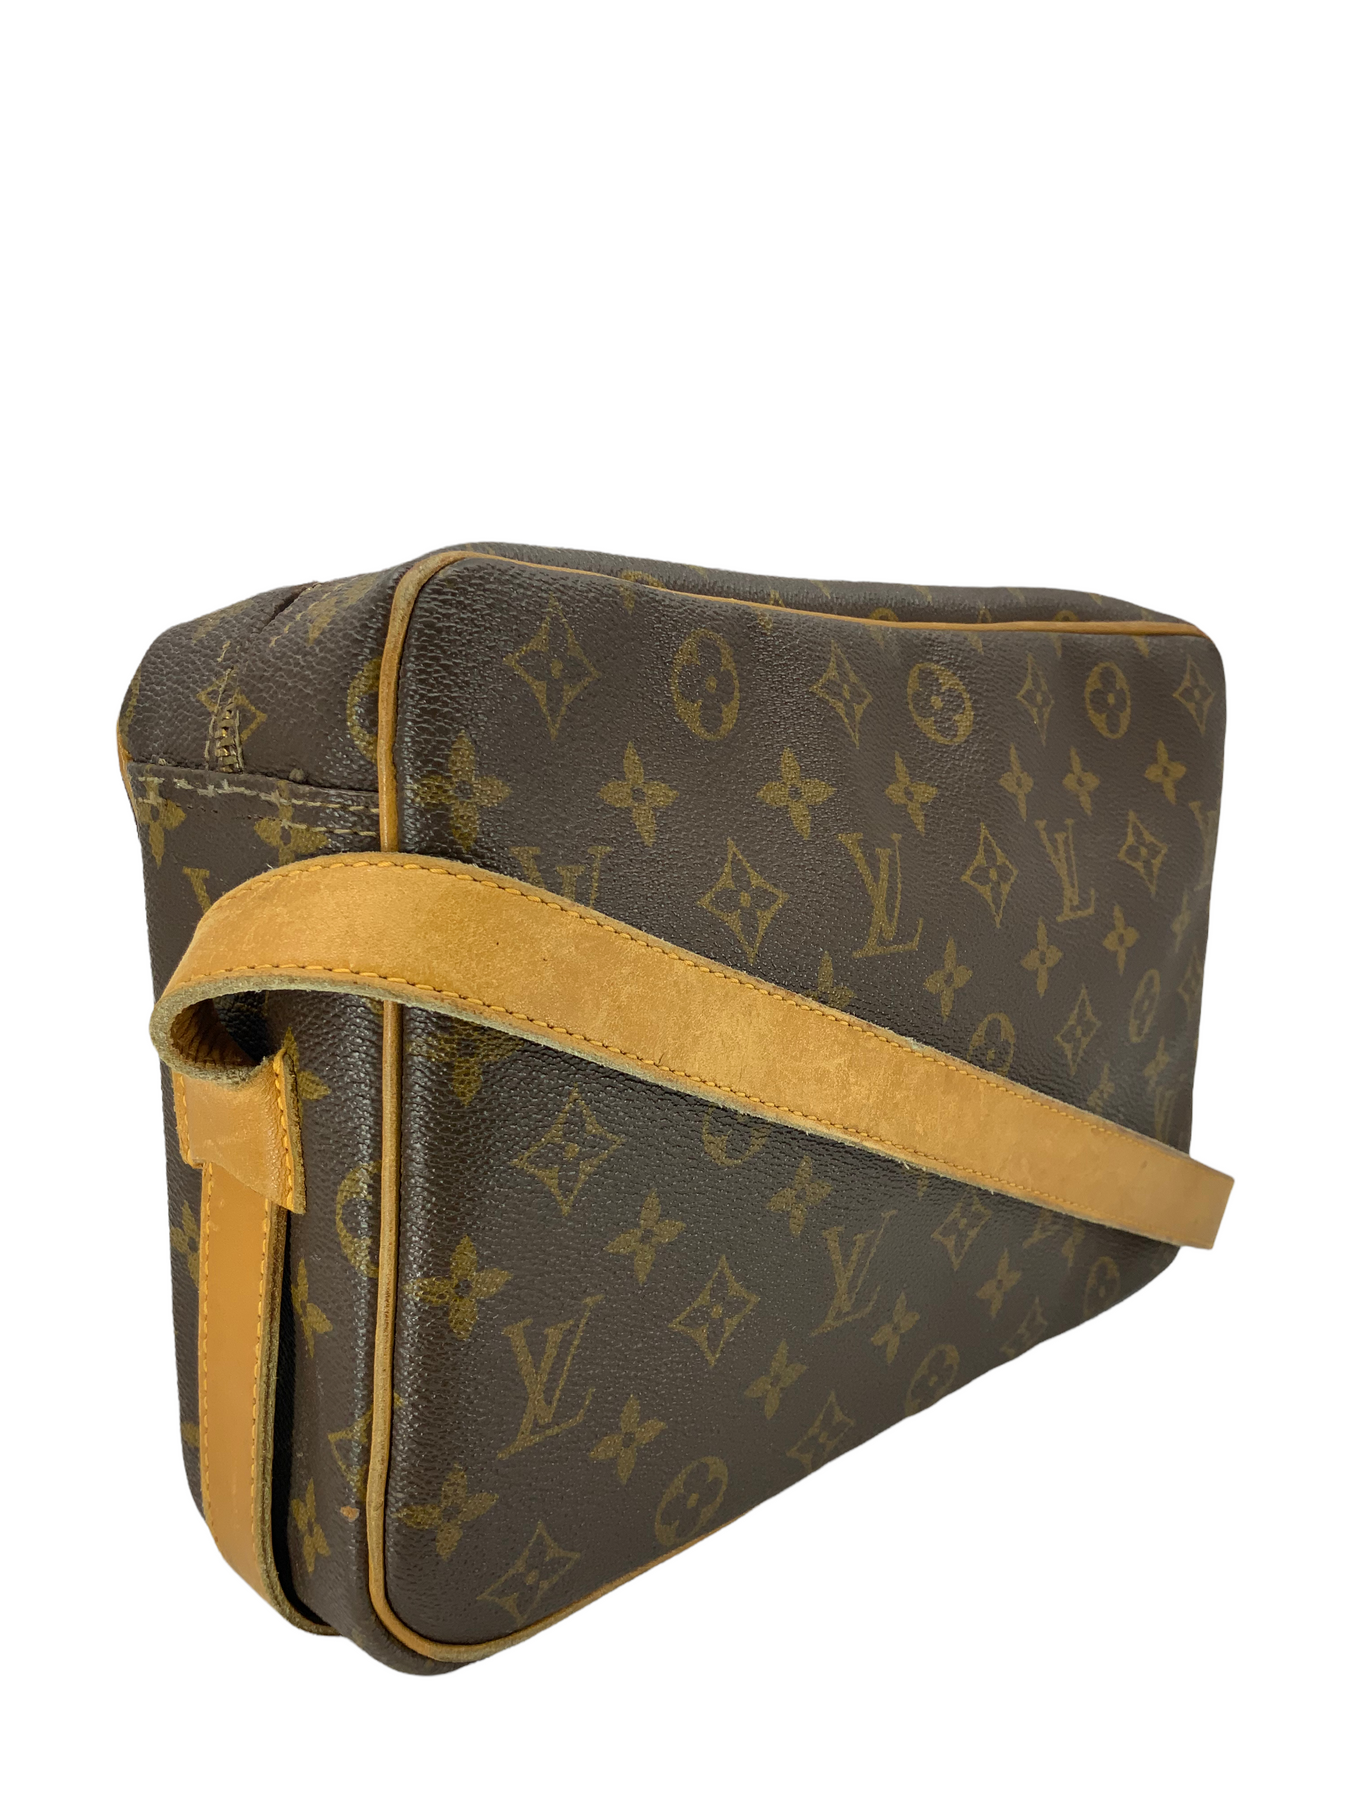 Louis Vuitton Vintage French Company Monogram Canvas Sac Bandouliere 3 -  Consigned Designs